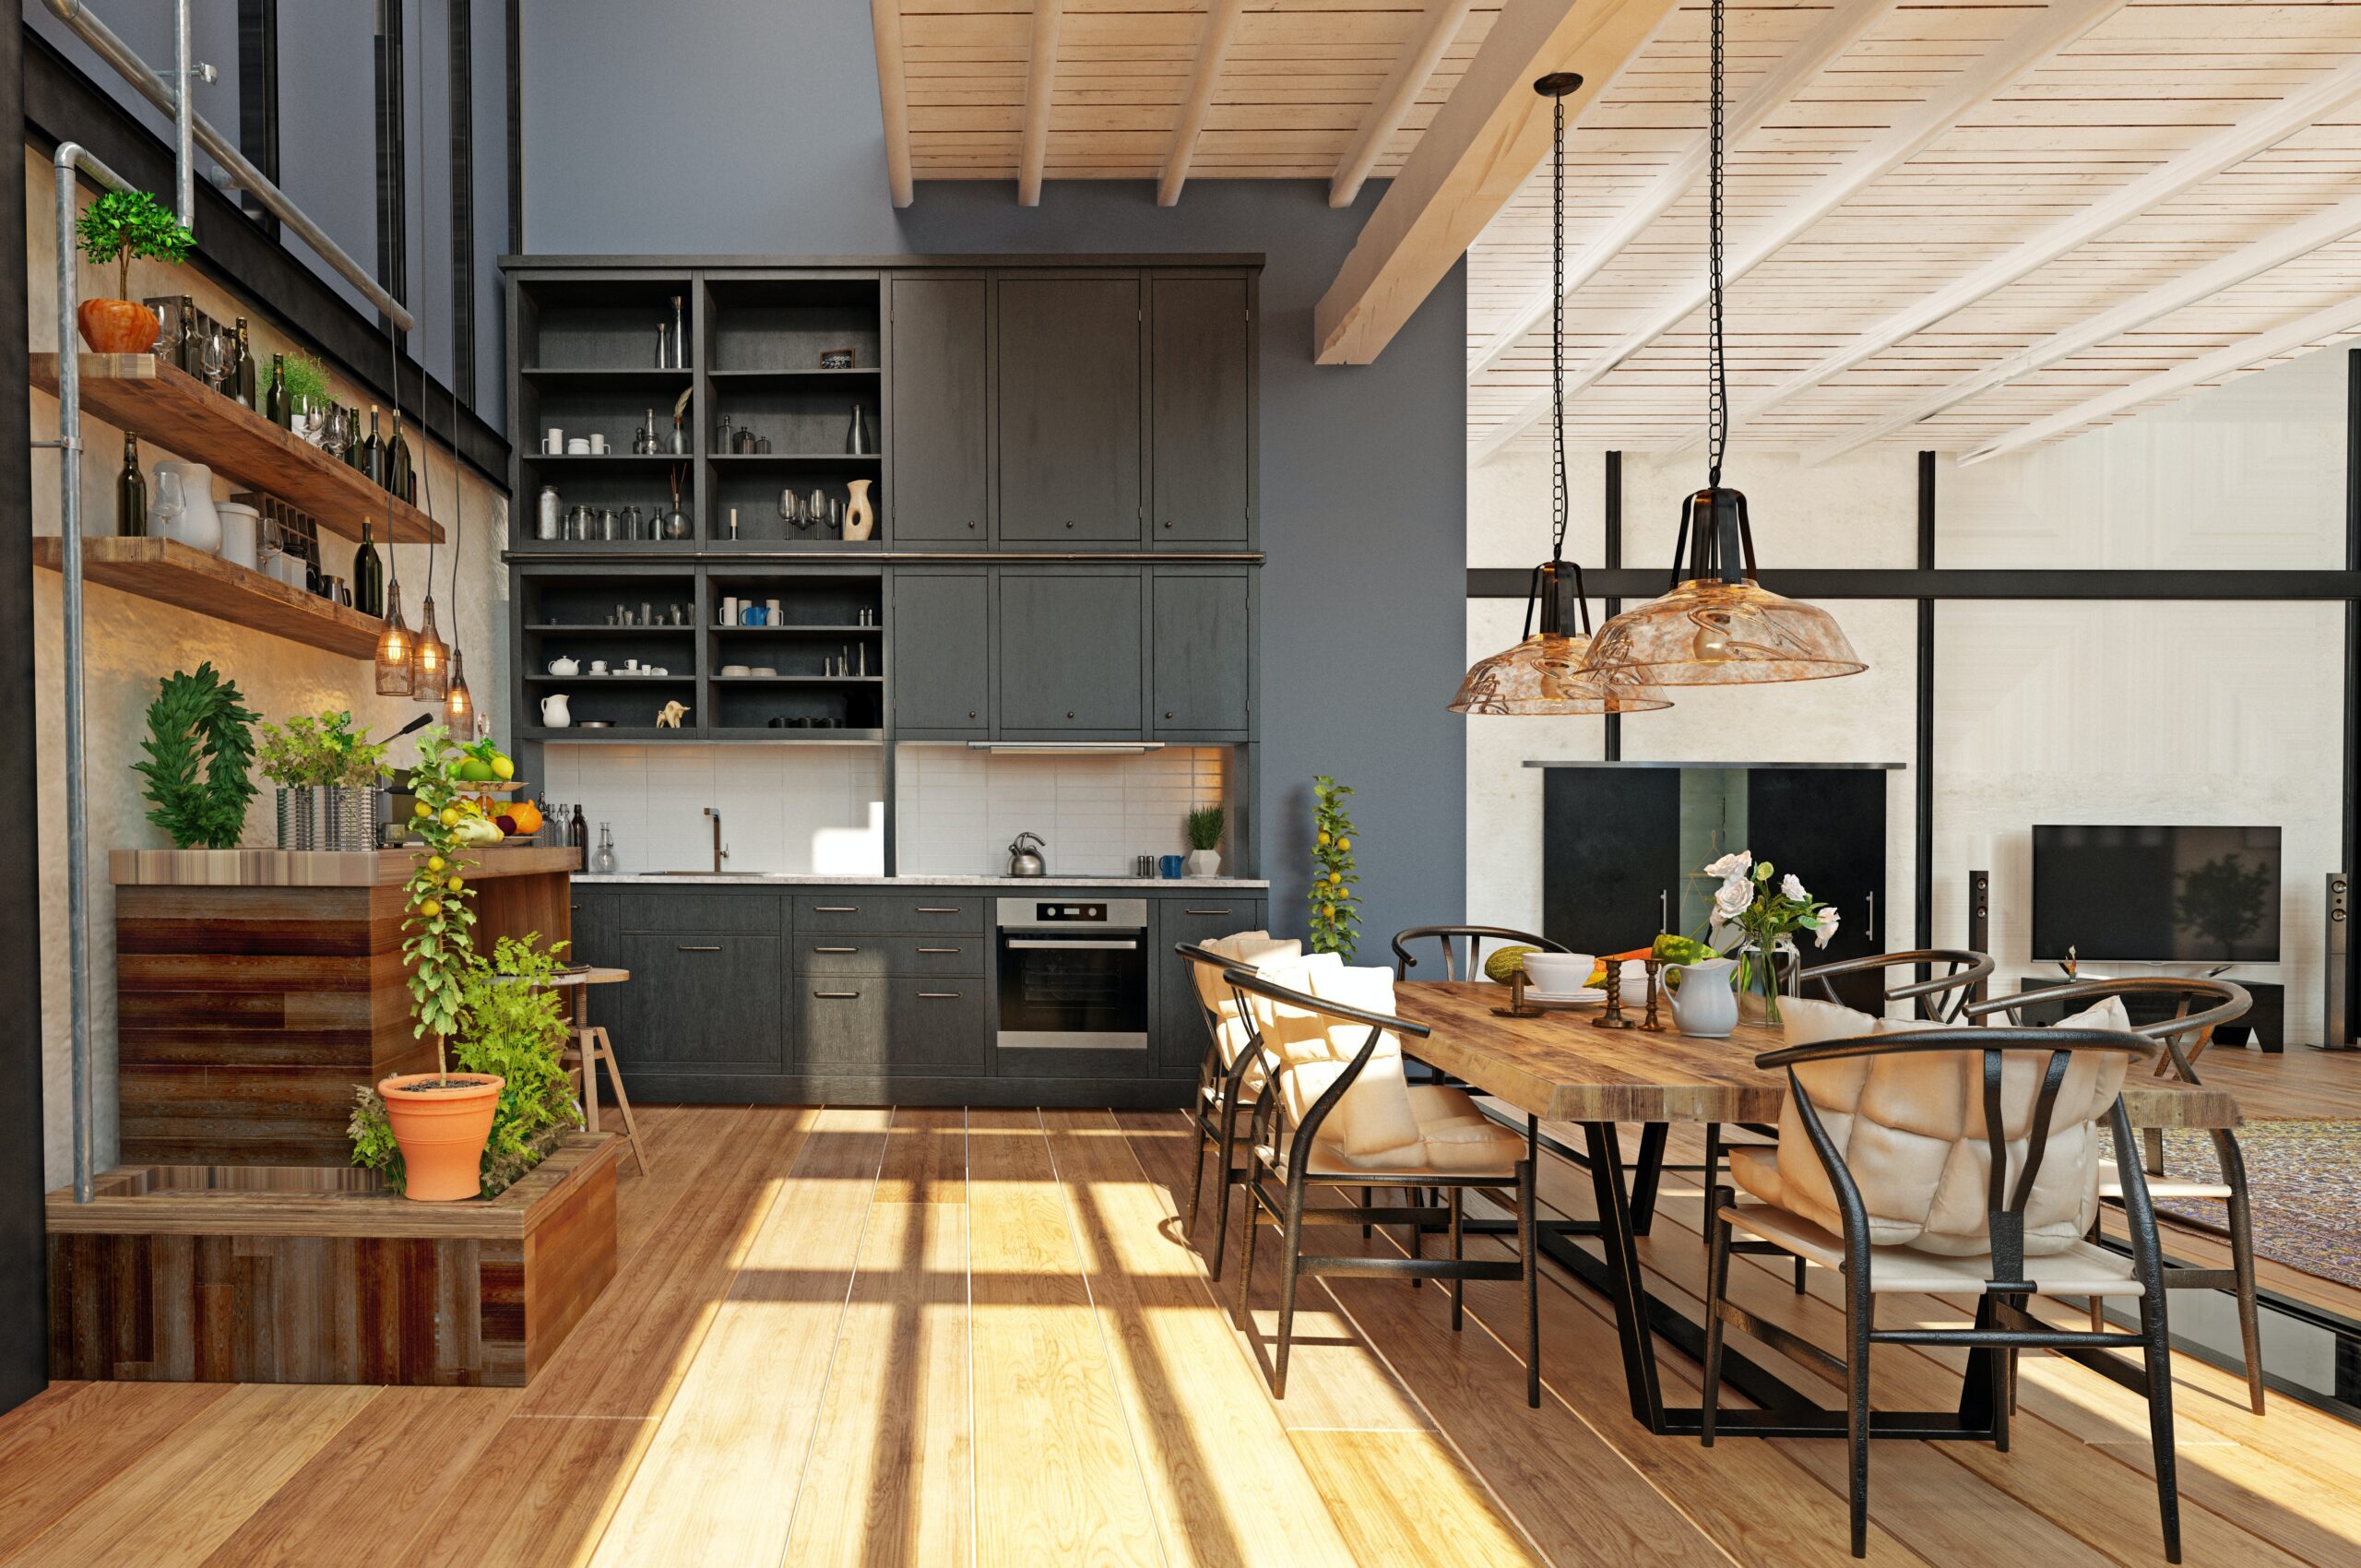 Impact of a kitchen remodel on enjoyment of space